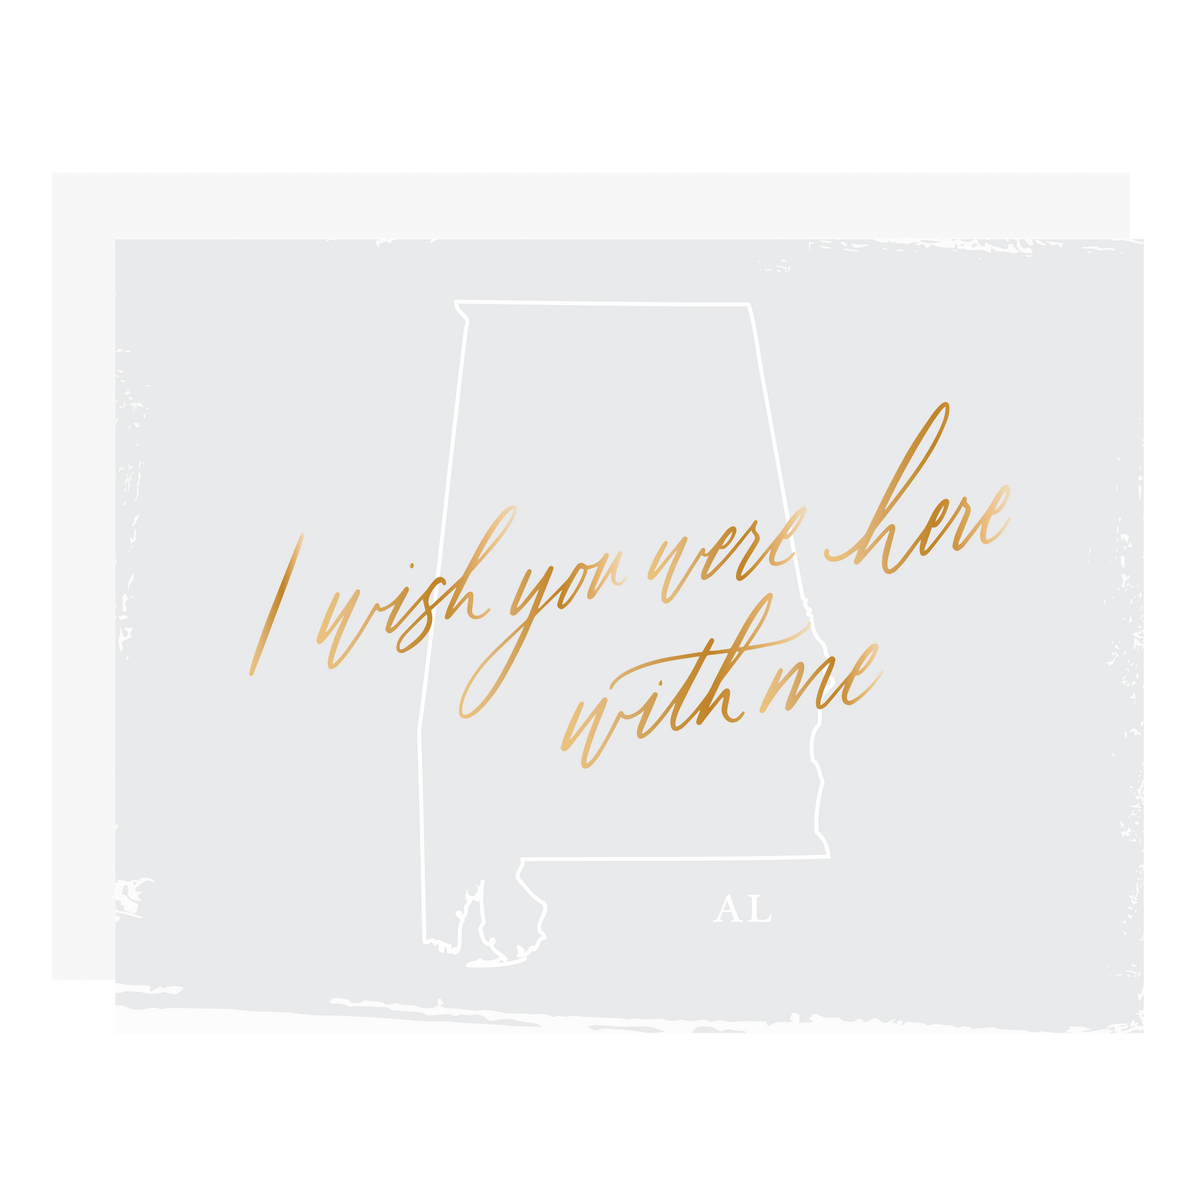 &quot;Wish You Were Here With Me - Alabama&quot;, letterpress printed by hand with gold foil. 